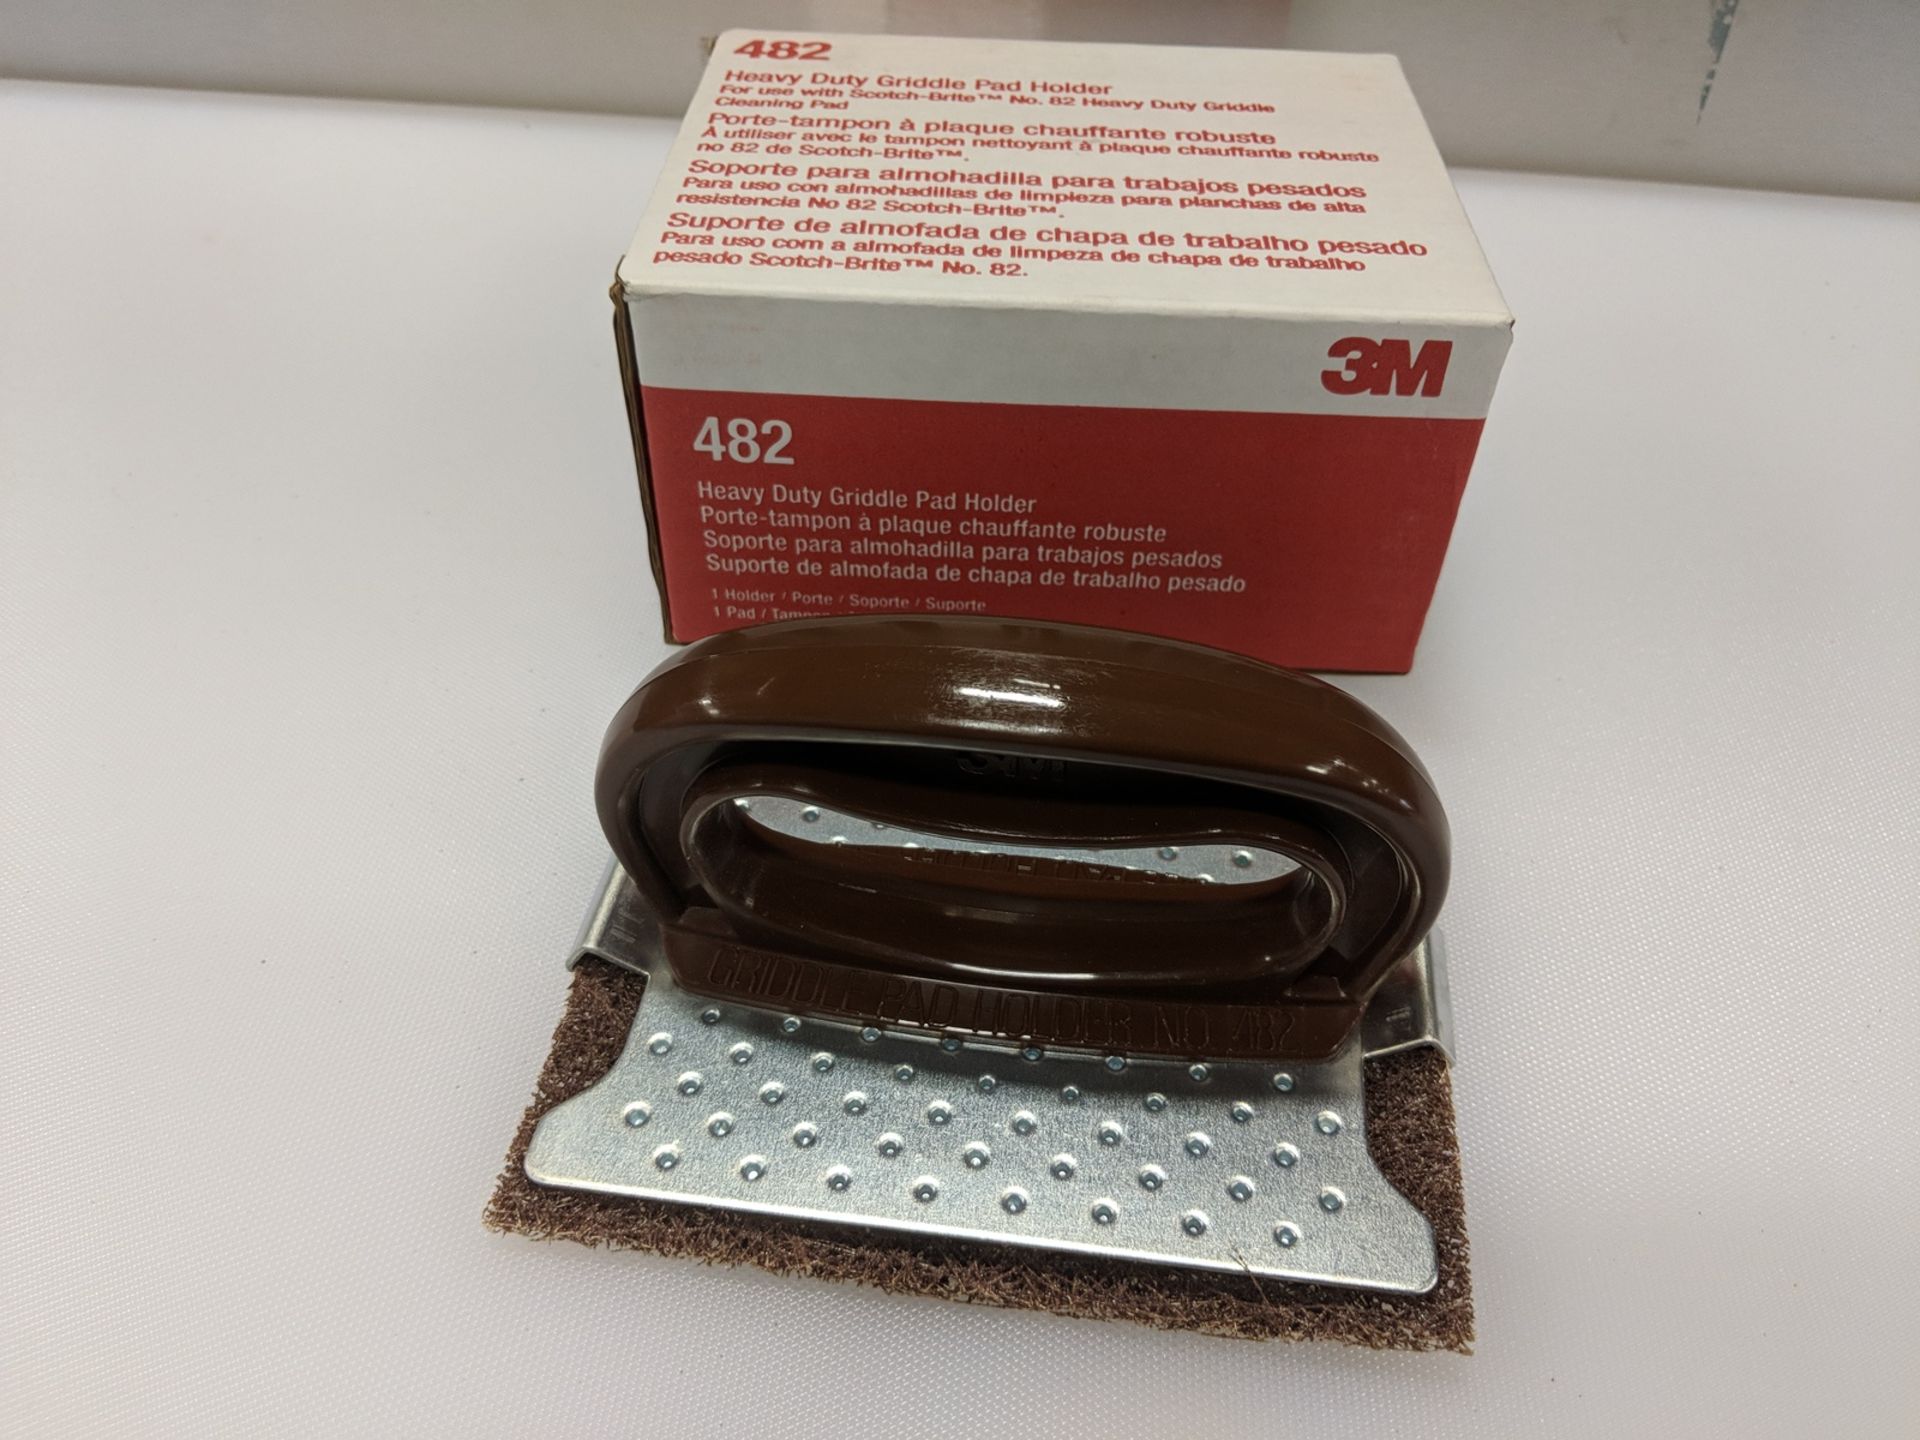 3M 482 Griddle Pad Holder with Griddle Cleaning Pad